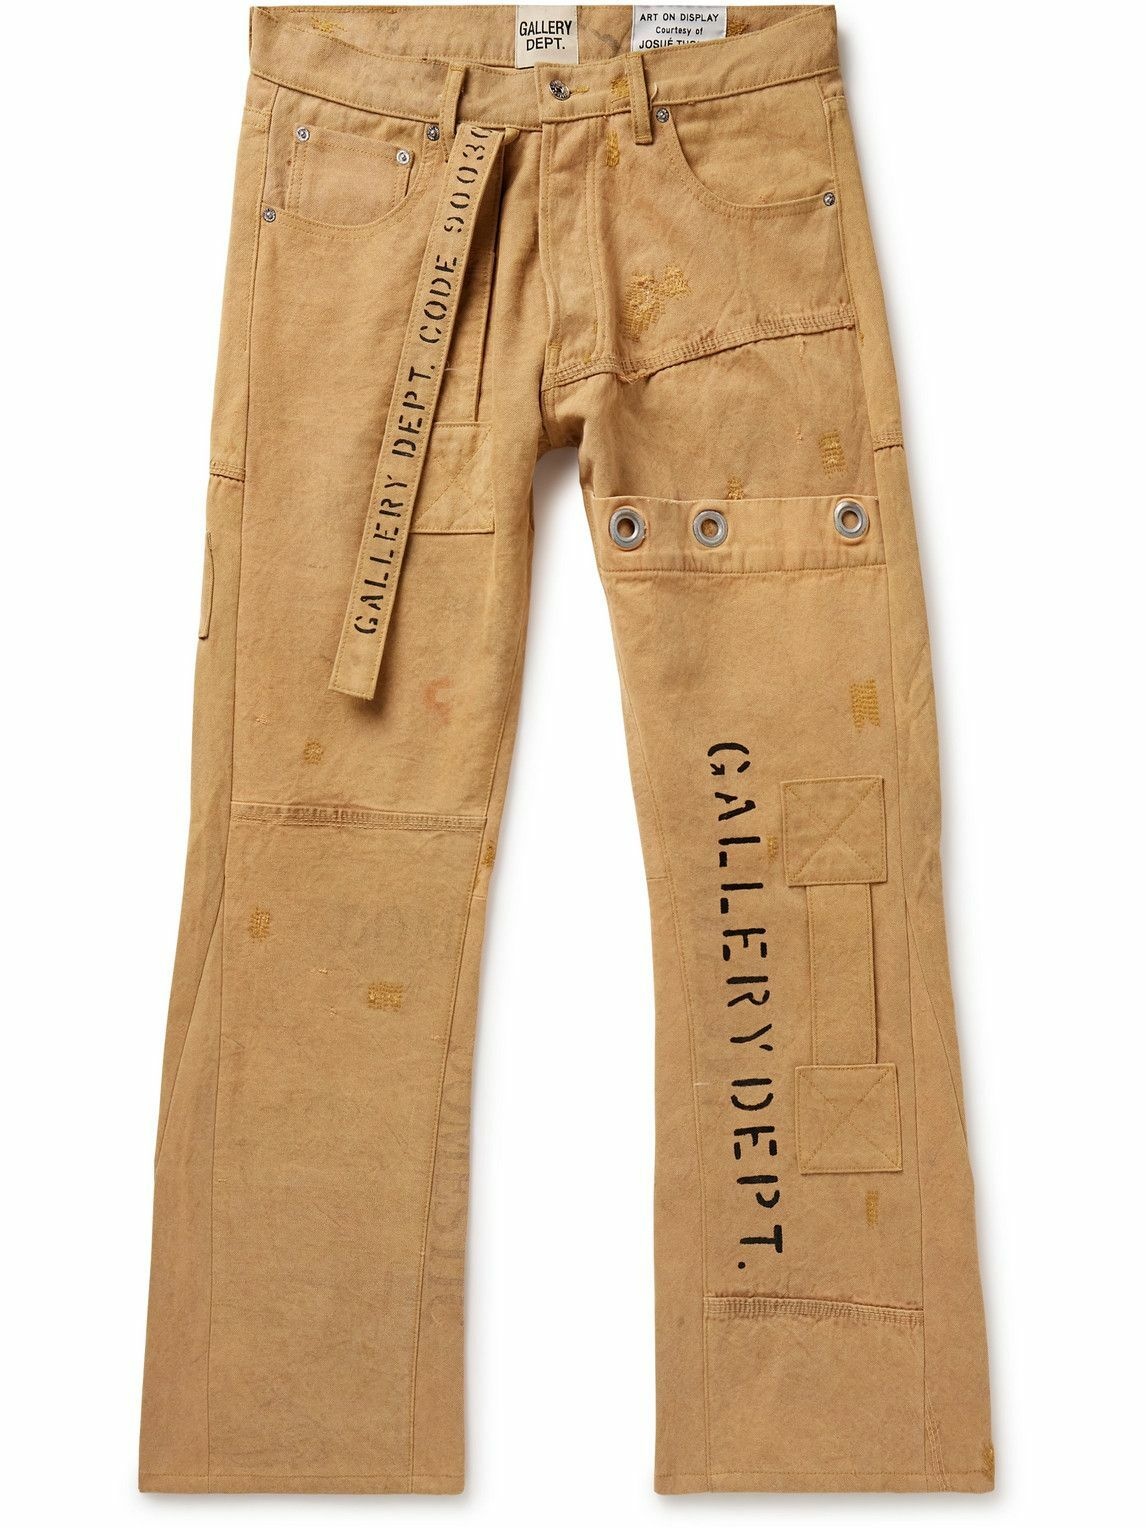 Photo: Gallery Dept. - Straight-Leg Embellished Printed Cotton-Canvas Cargo Trousers - Brown